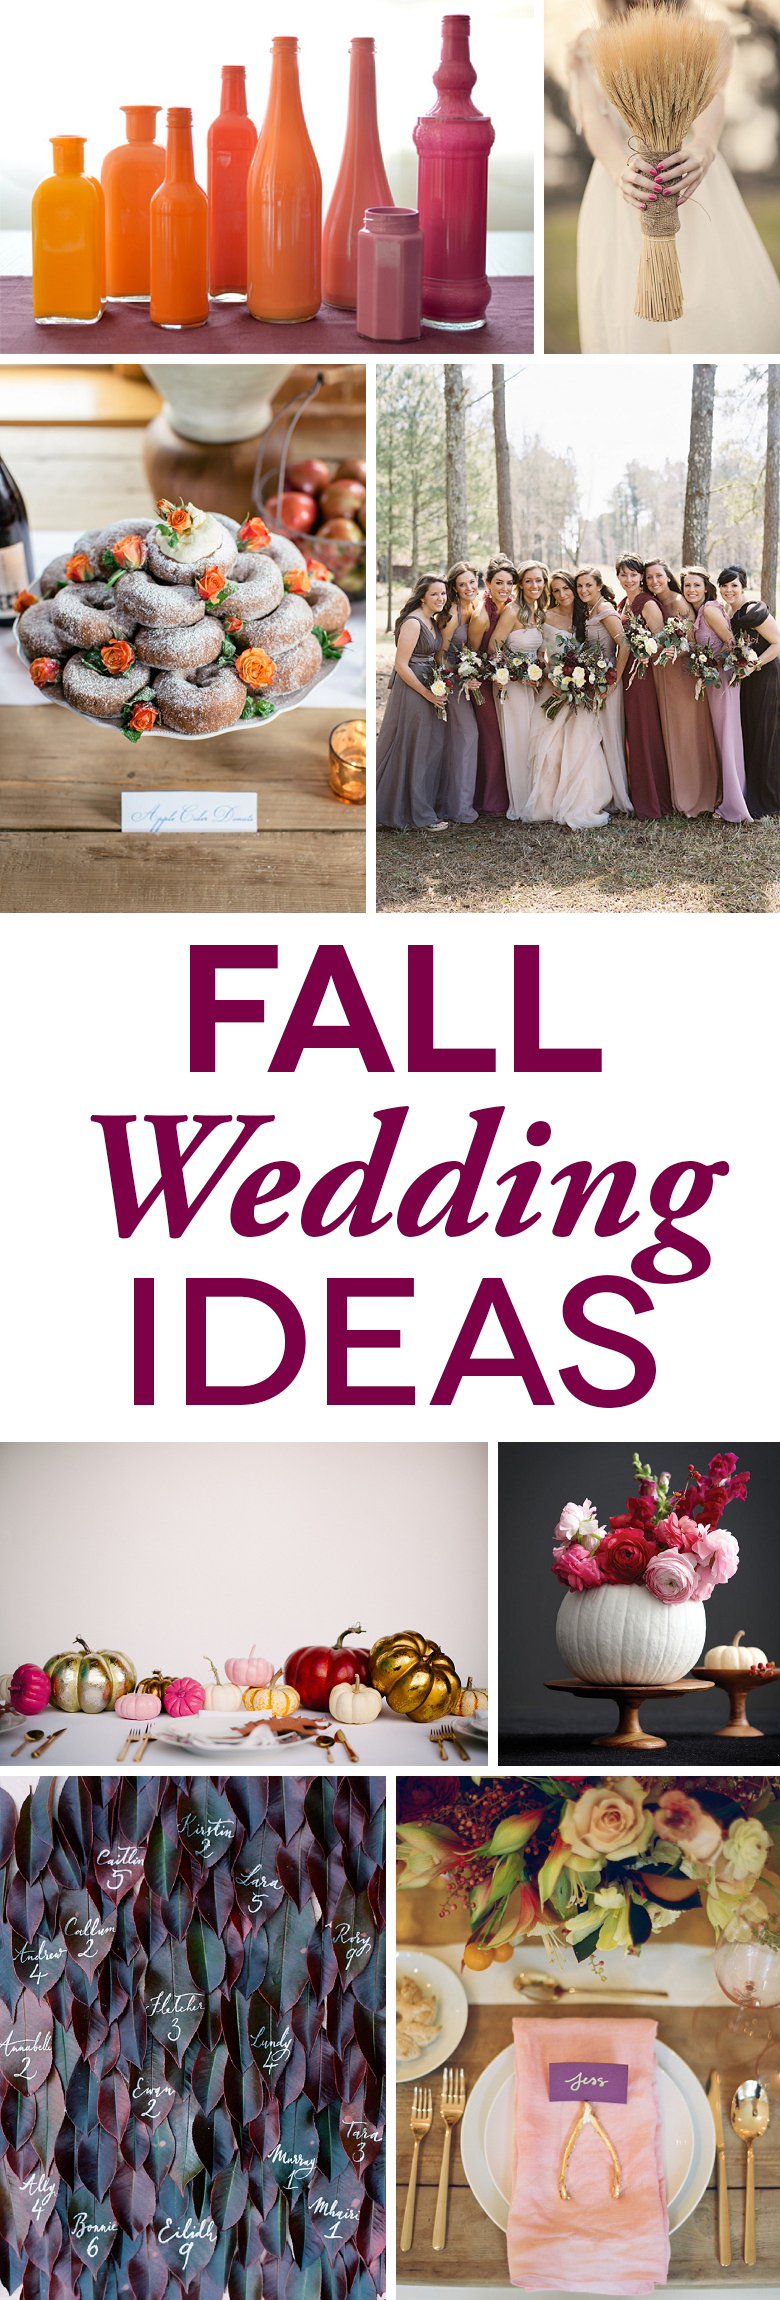 15 Fall Wedding Ideas and colors